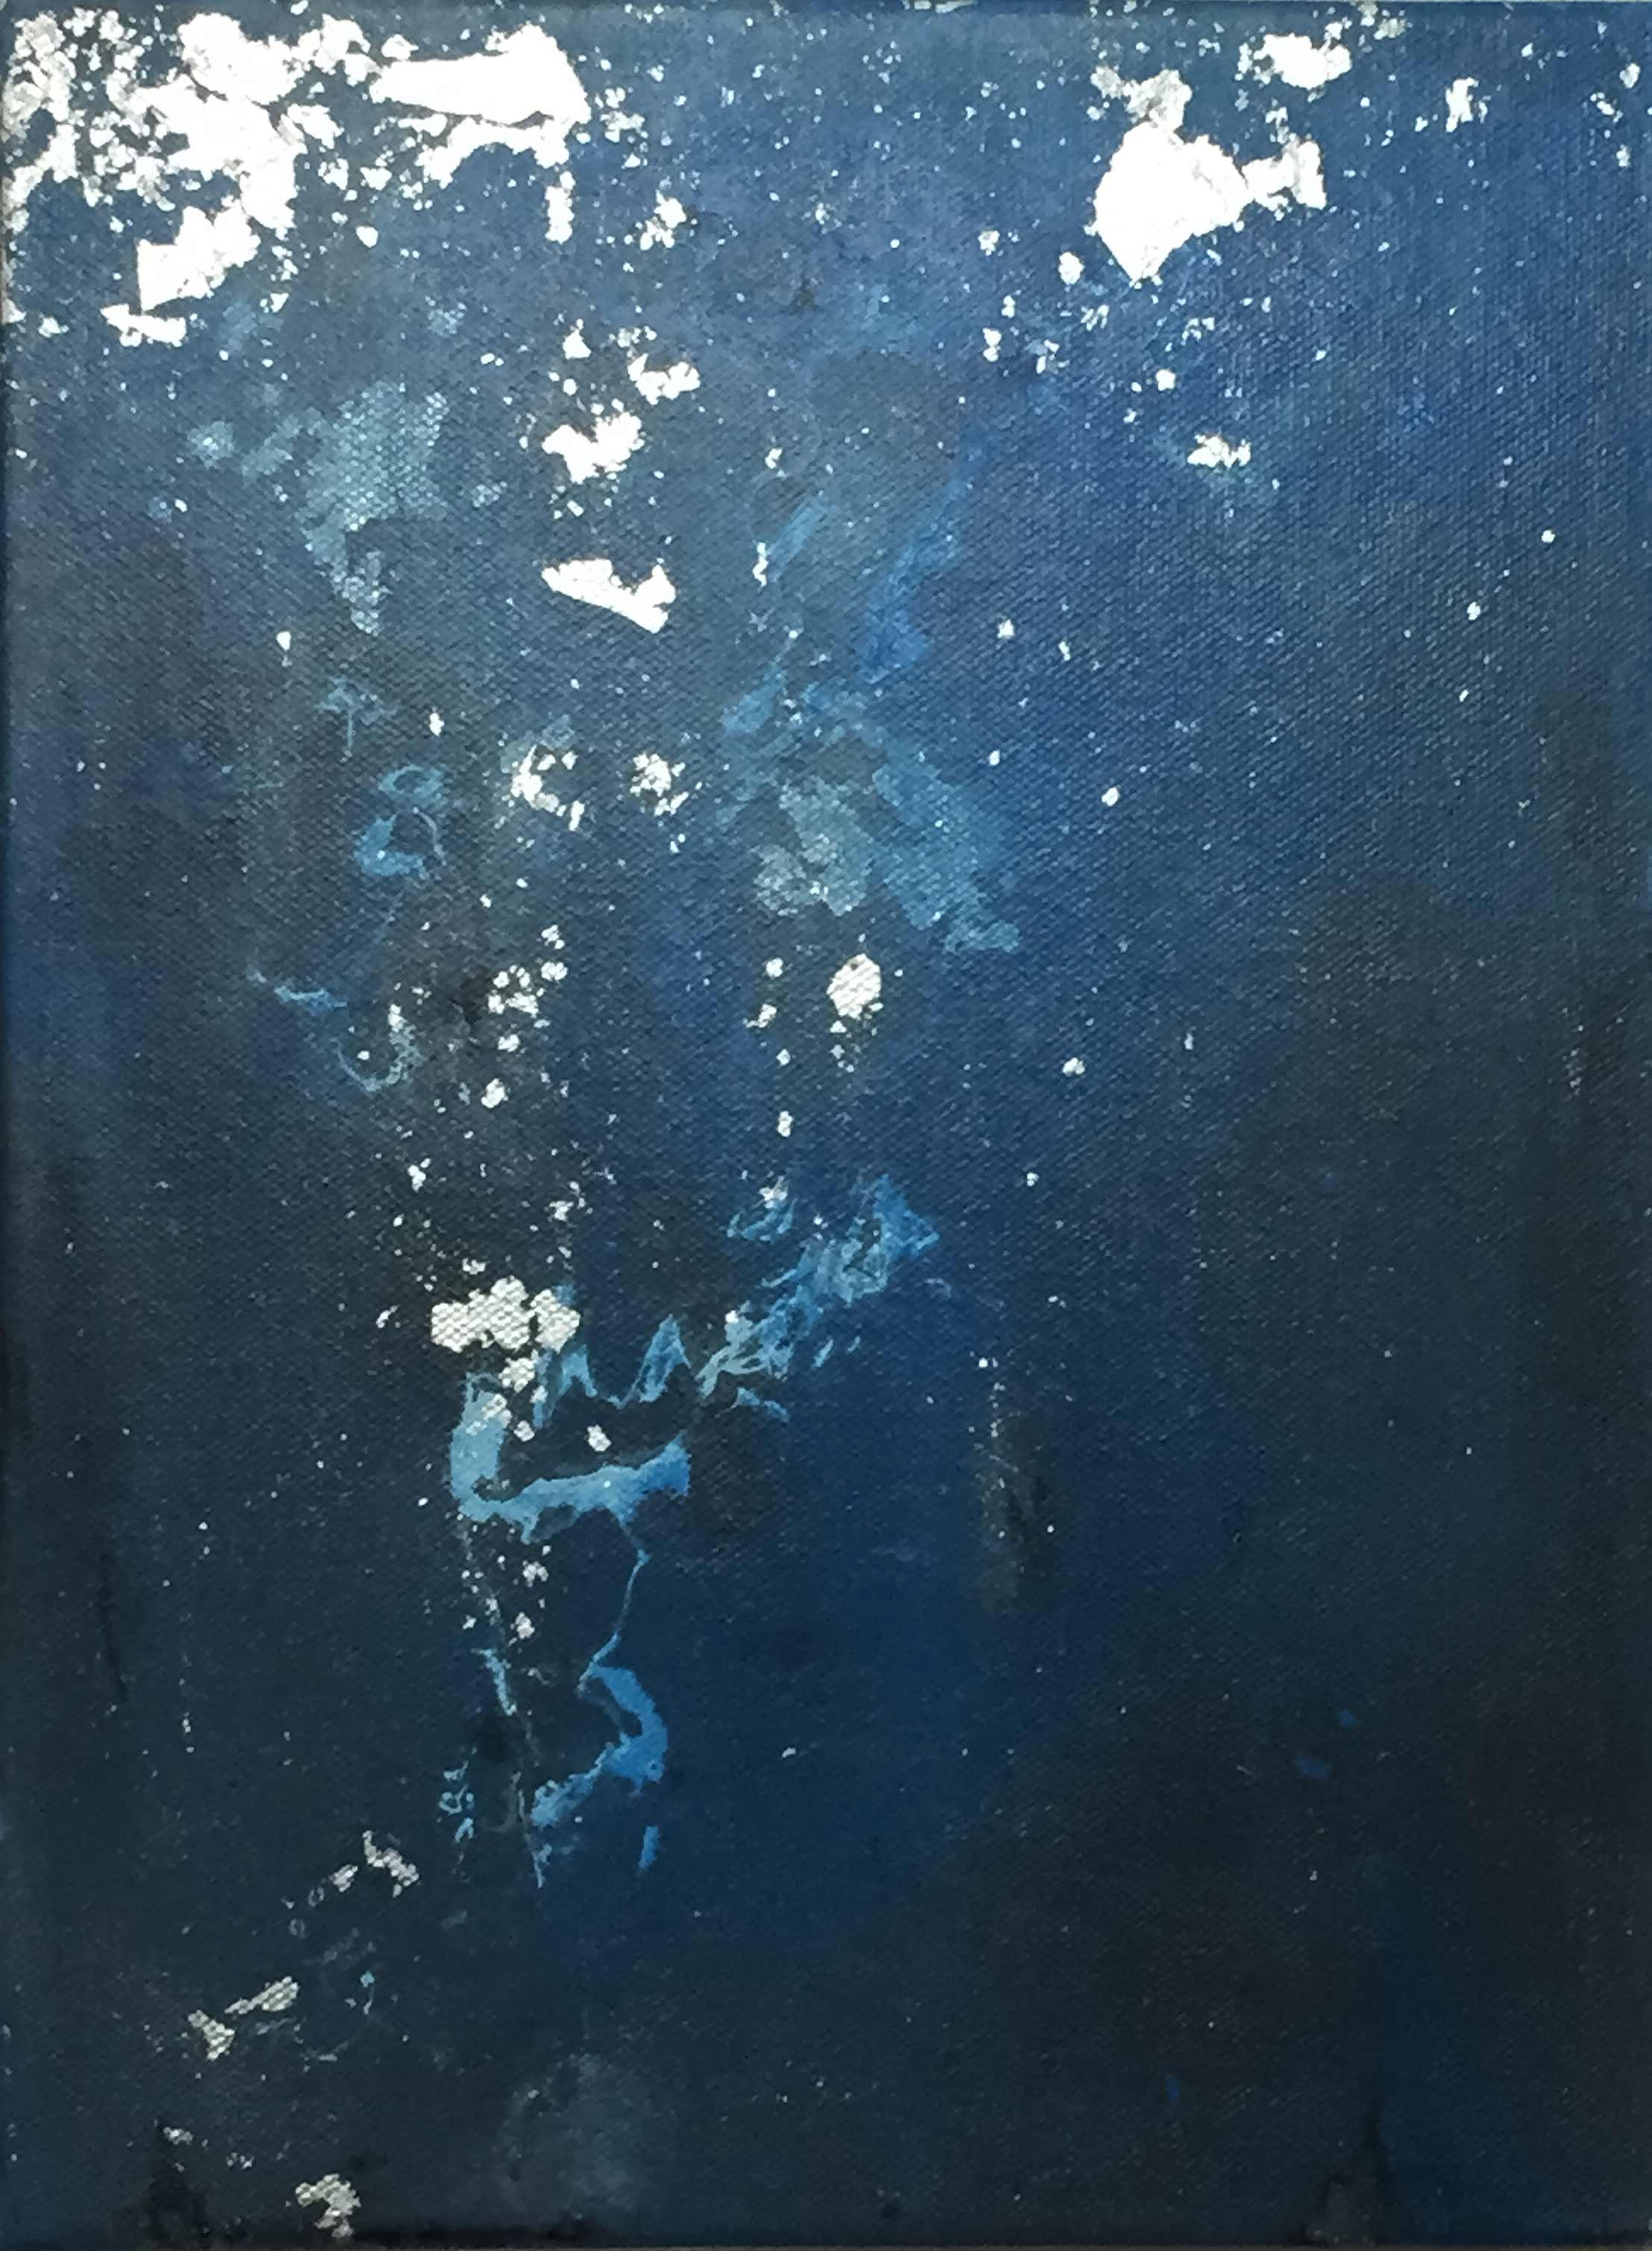 Pedro A, Figueredo. "Nocturne I" (2015). Acrylic and metal foil on canvas; 12 x 9 in.